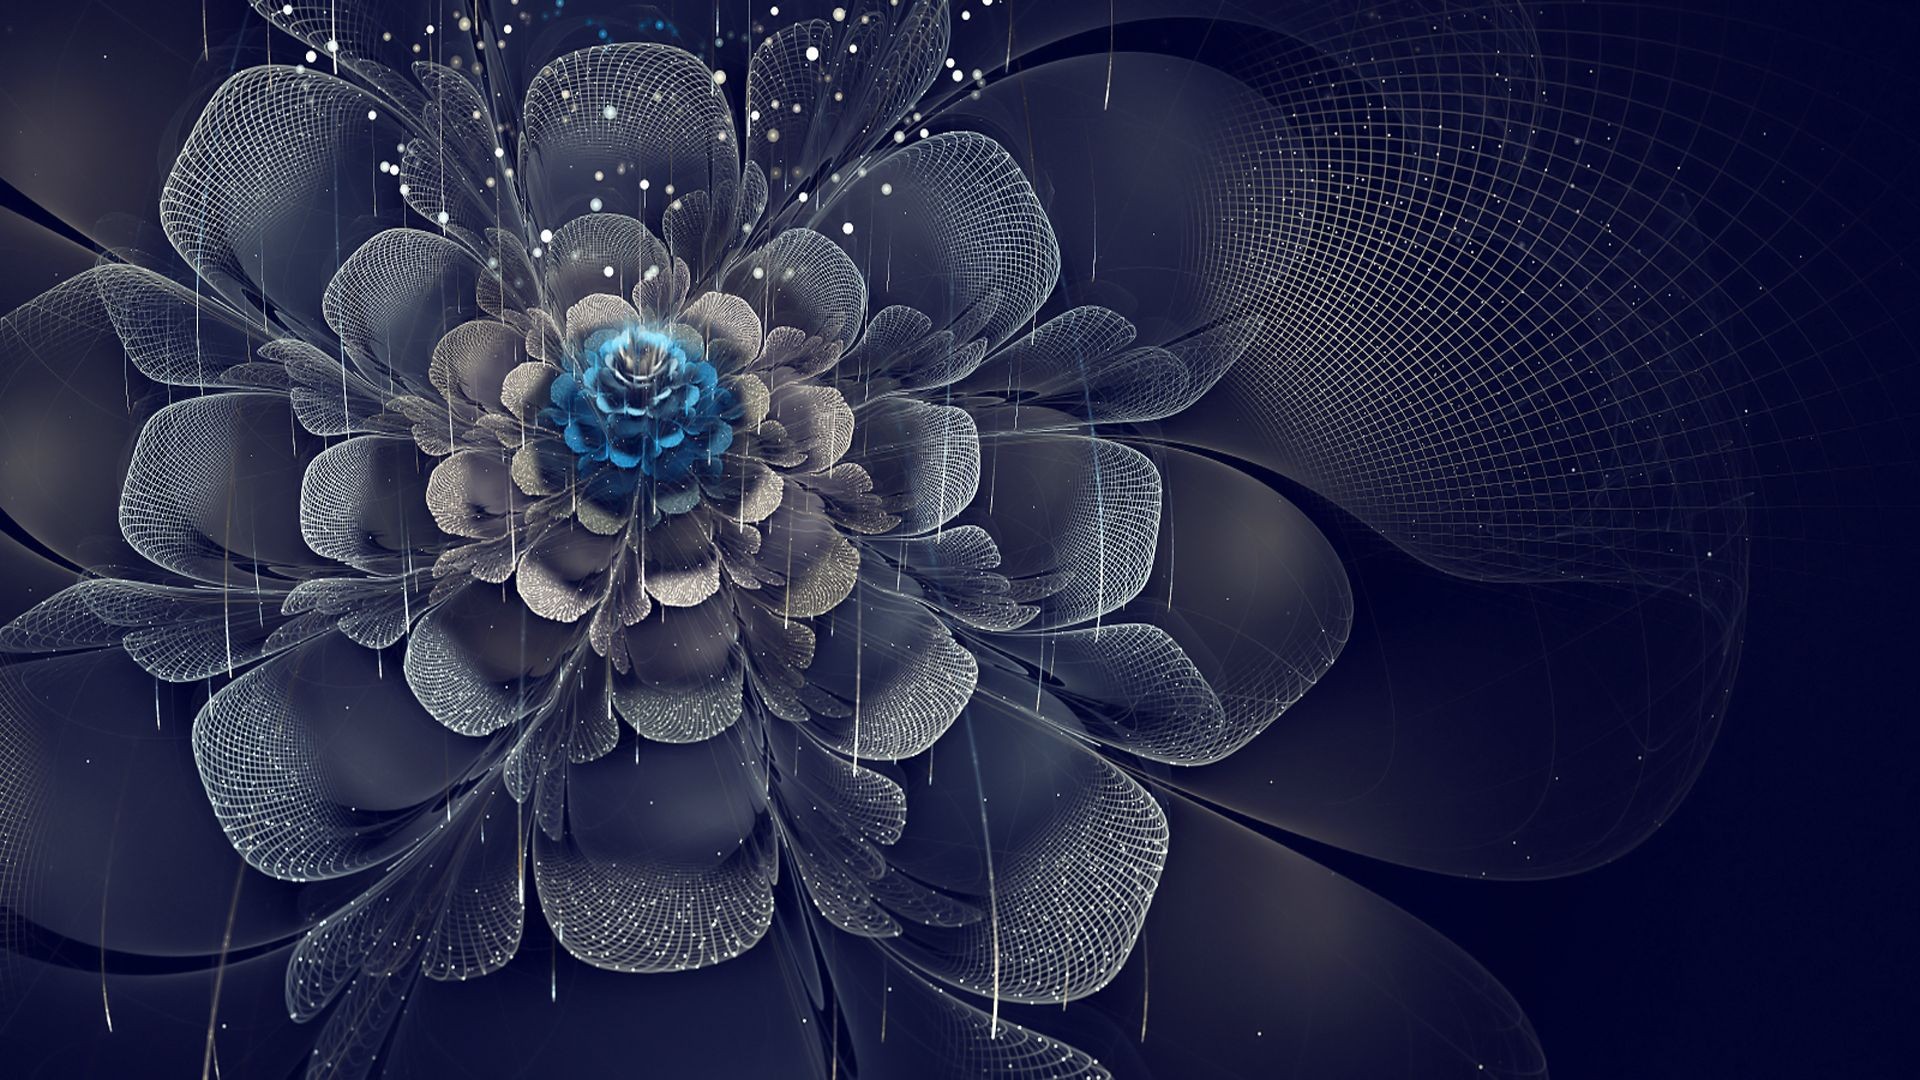 Abstract Fractal Fractal Flowers 1920x1080